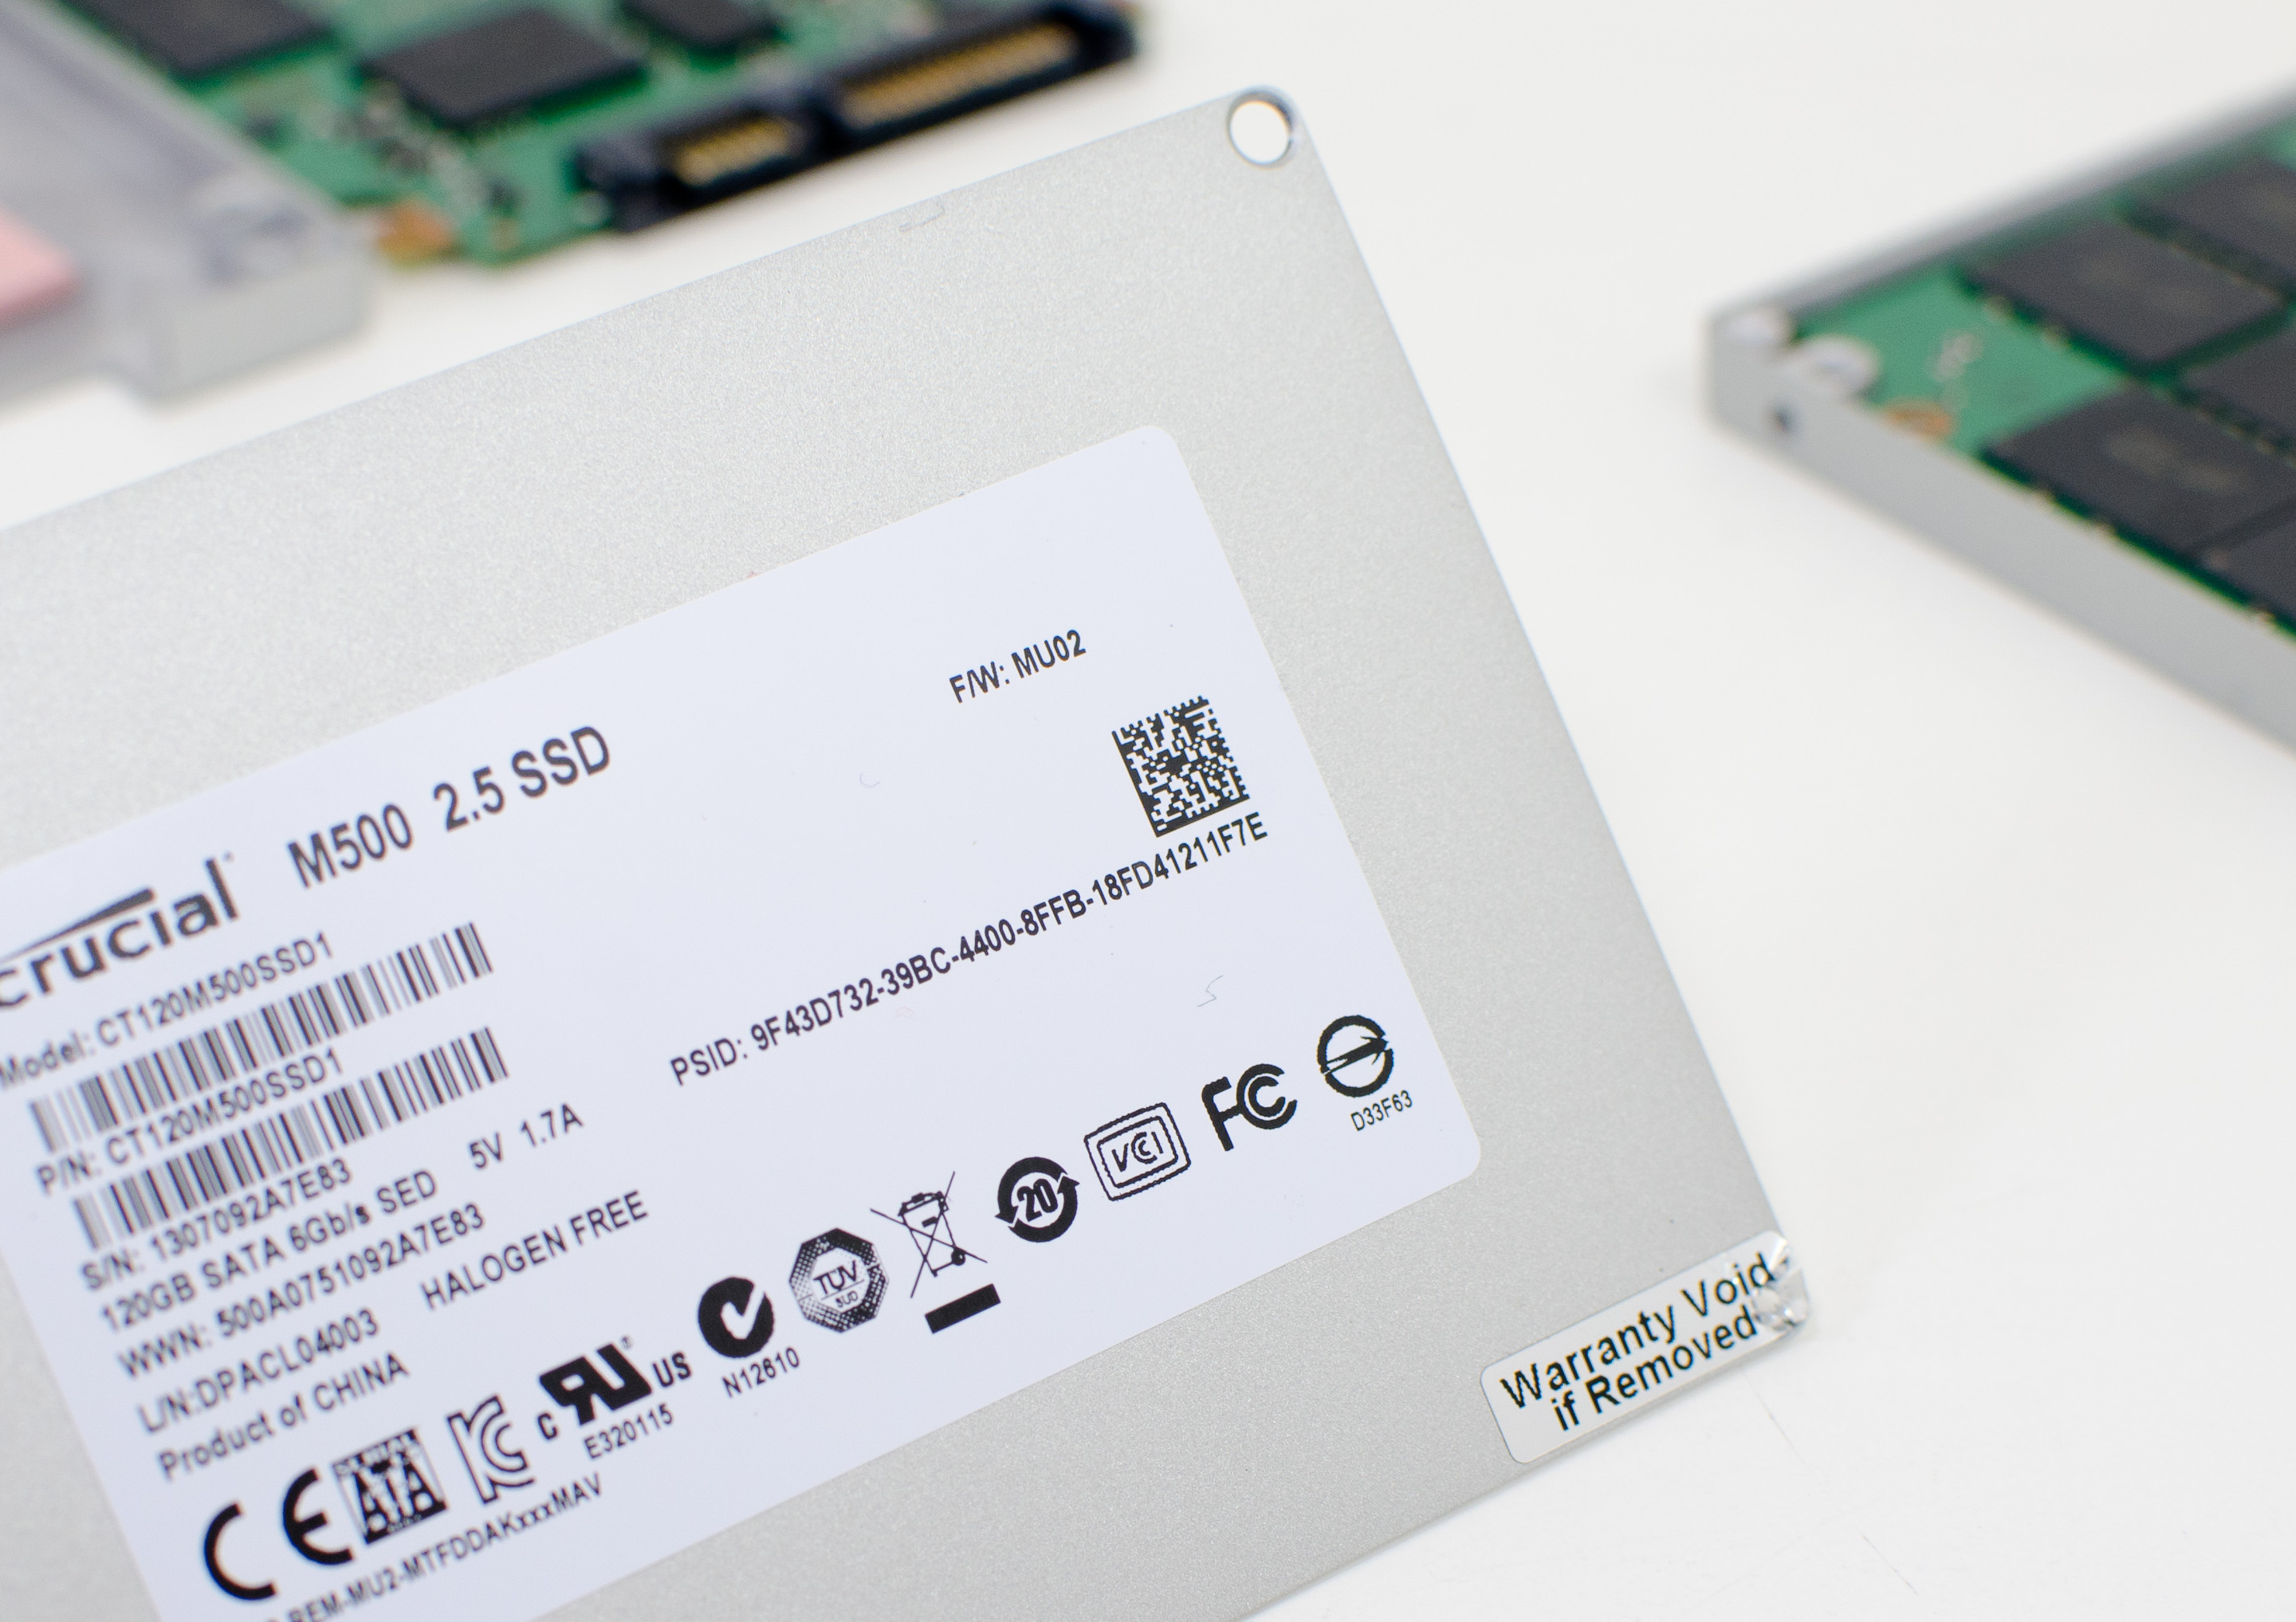 Encryption Done Right & Drive Configurations - Crucial/Micron M500 Review (960GB, 480GB, 240GB, 120GB)